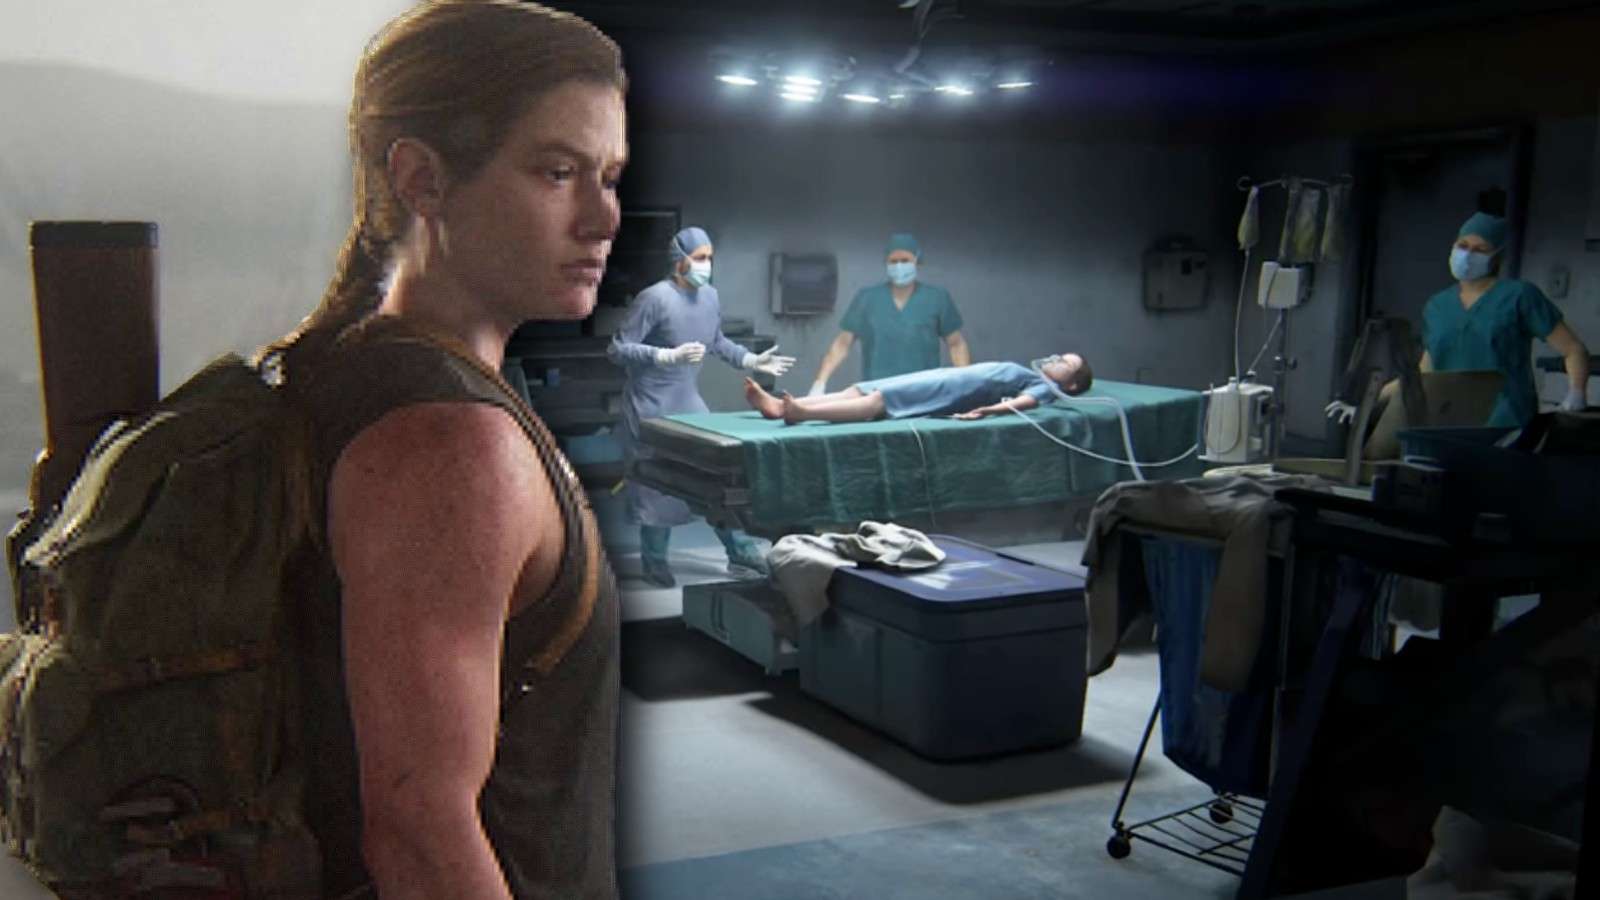 Abby in The Last of Us Part 2 and the hospital scene from the game